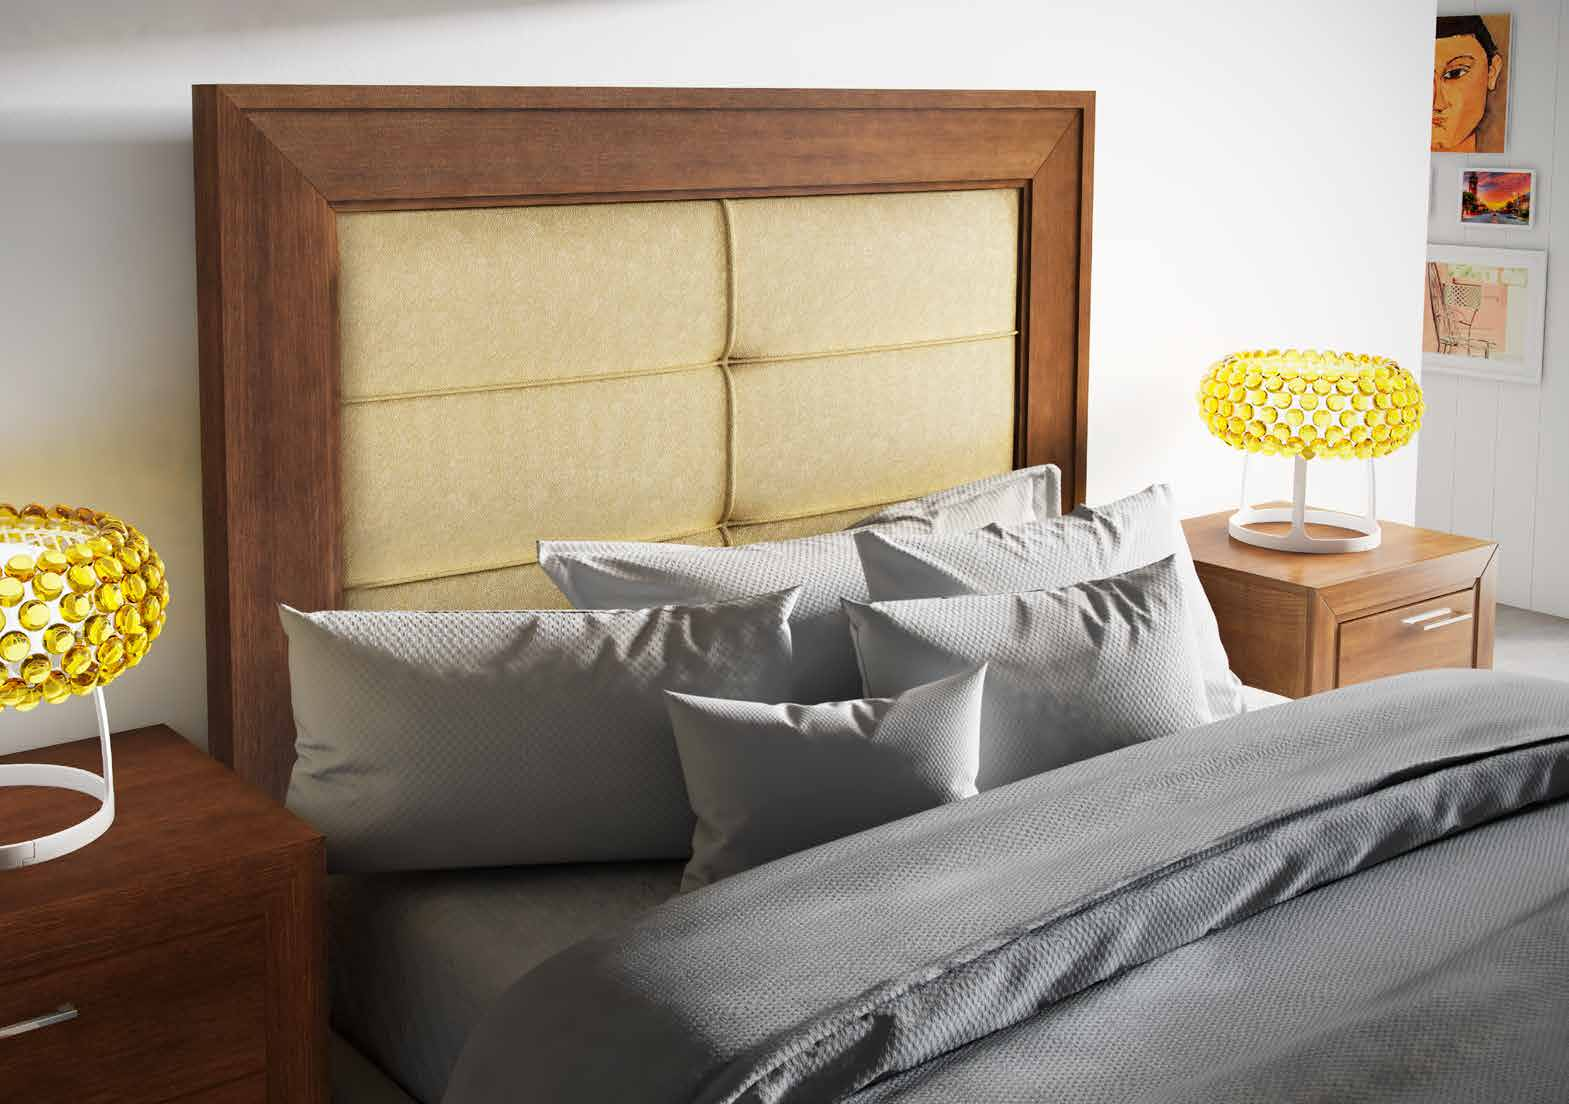 Regarding bedrooms, headboards play a significant role matching the rest of the pieces of furniture that